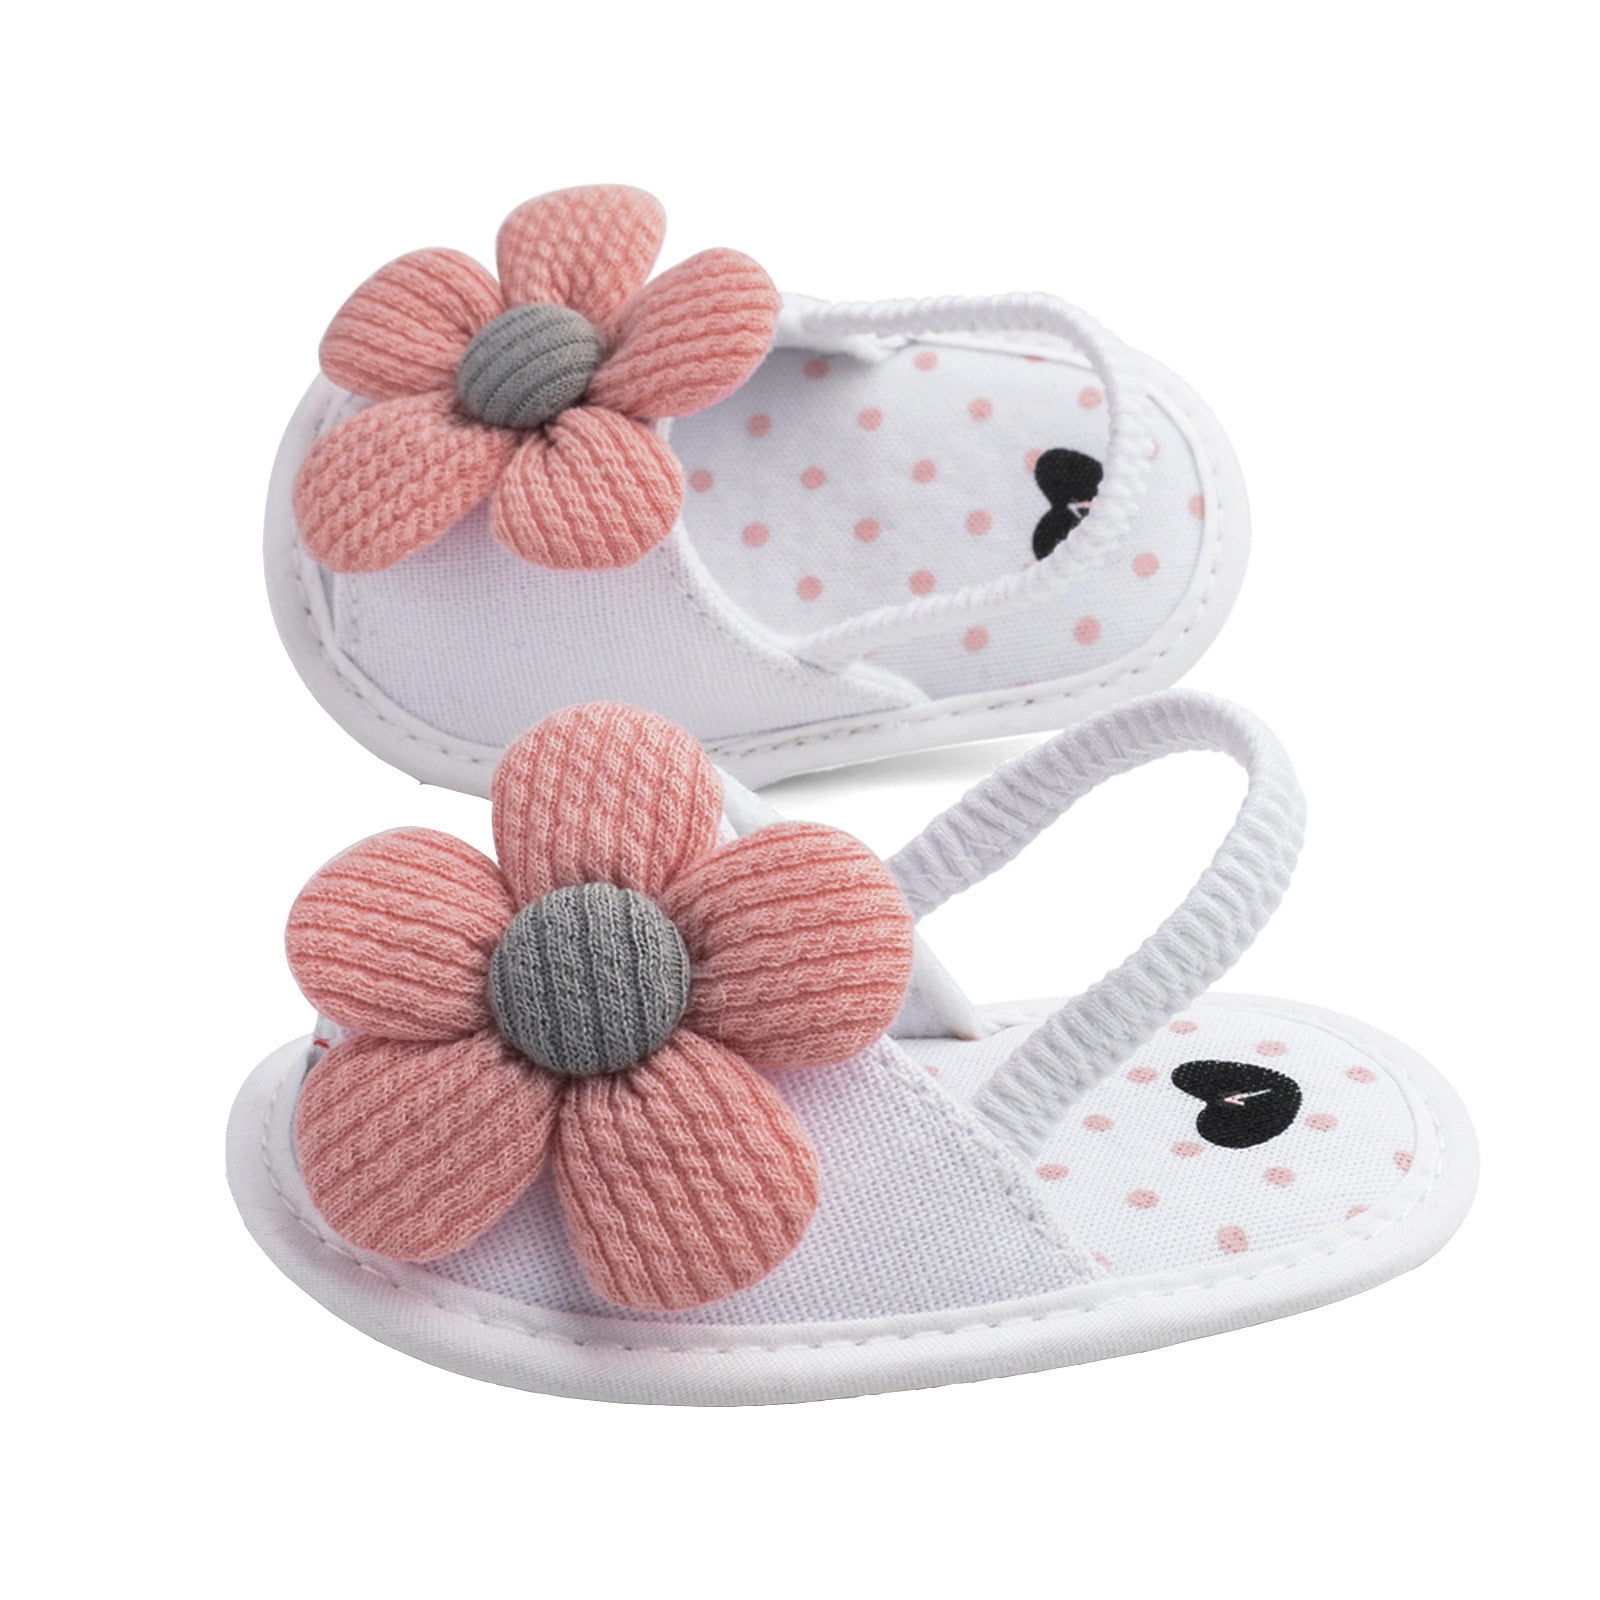 summer dress shoes 06 months baby sandals flower baby shoes gladiator sandals ready to ship